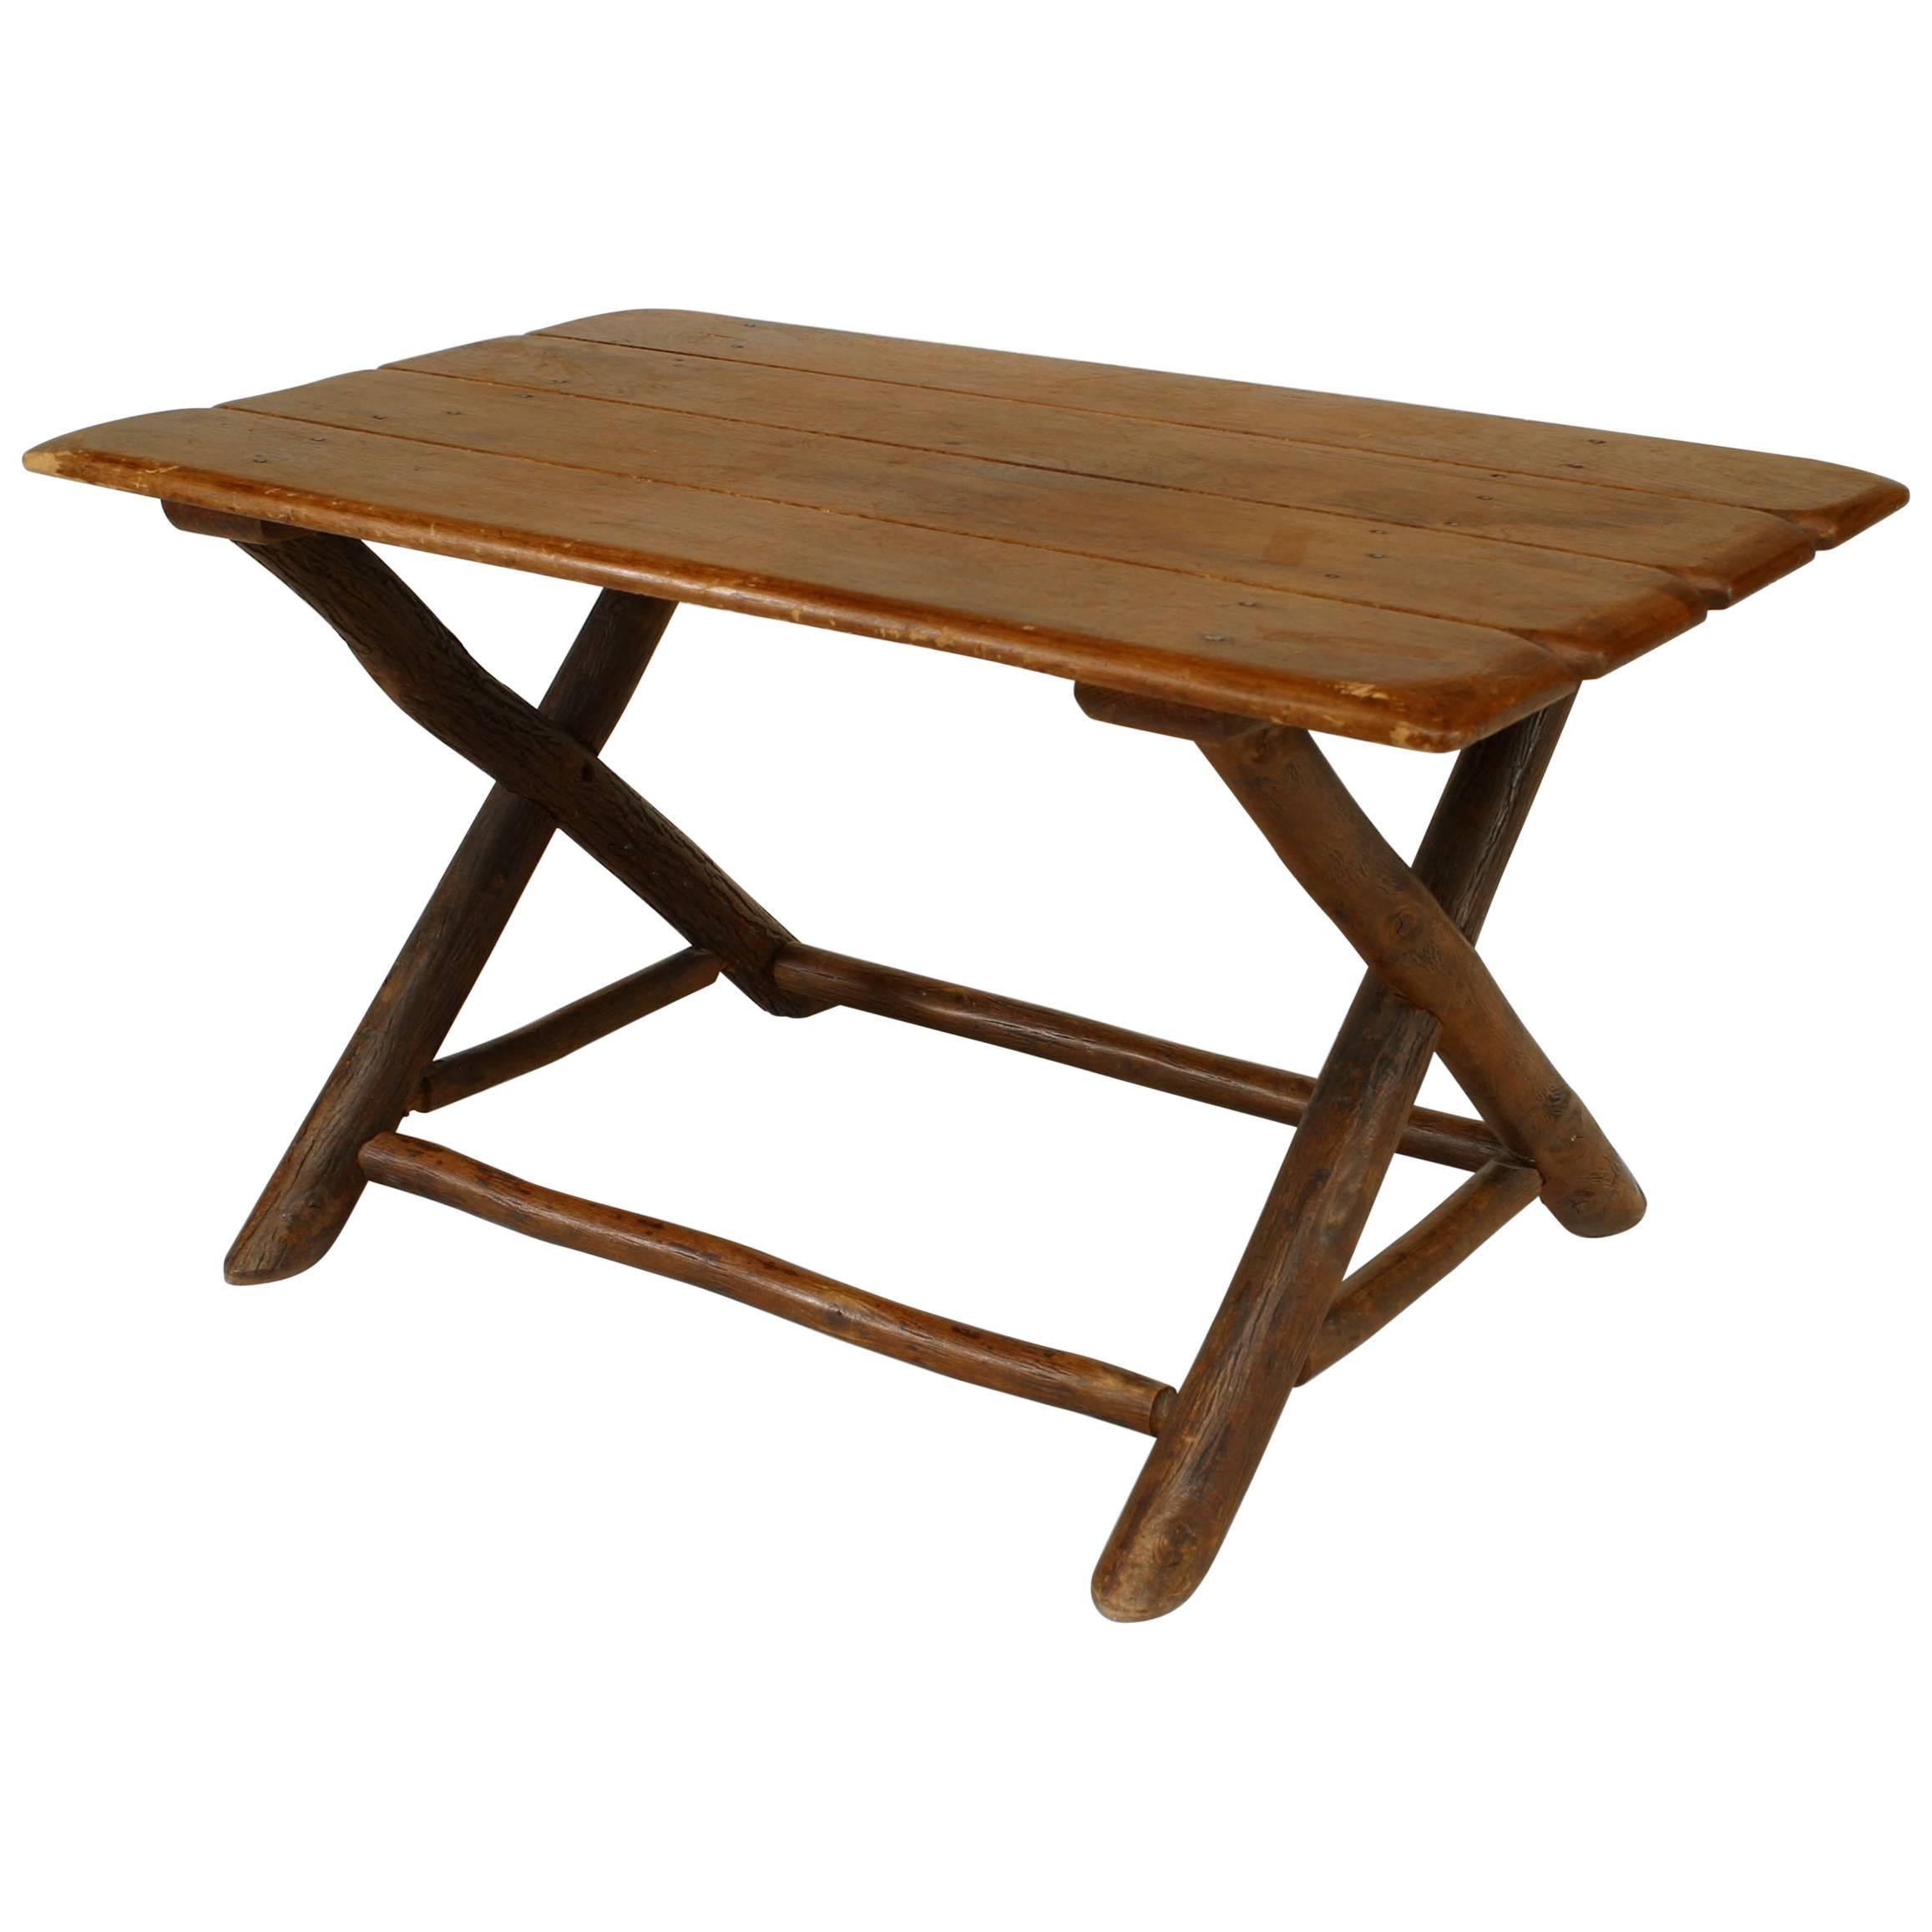 Rustic Old Hickory Plank Top Cross Leg Coffee Table